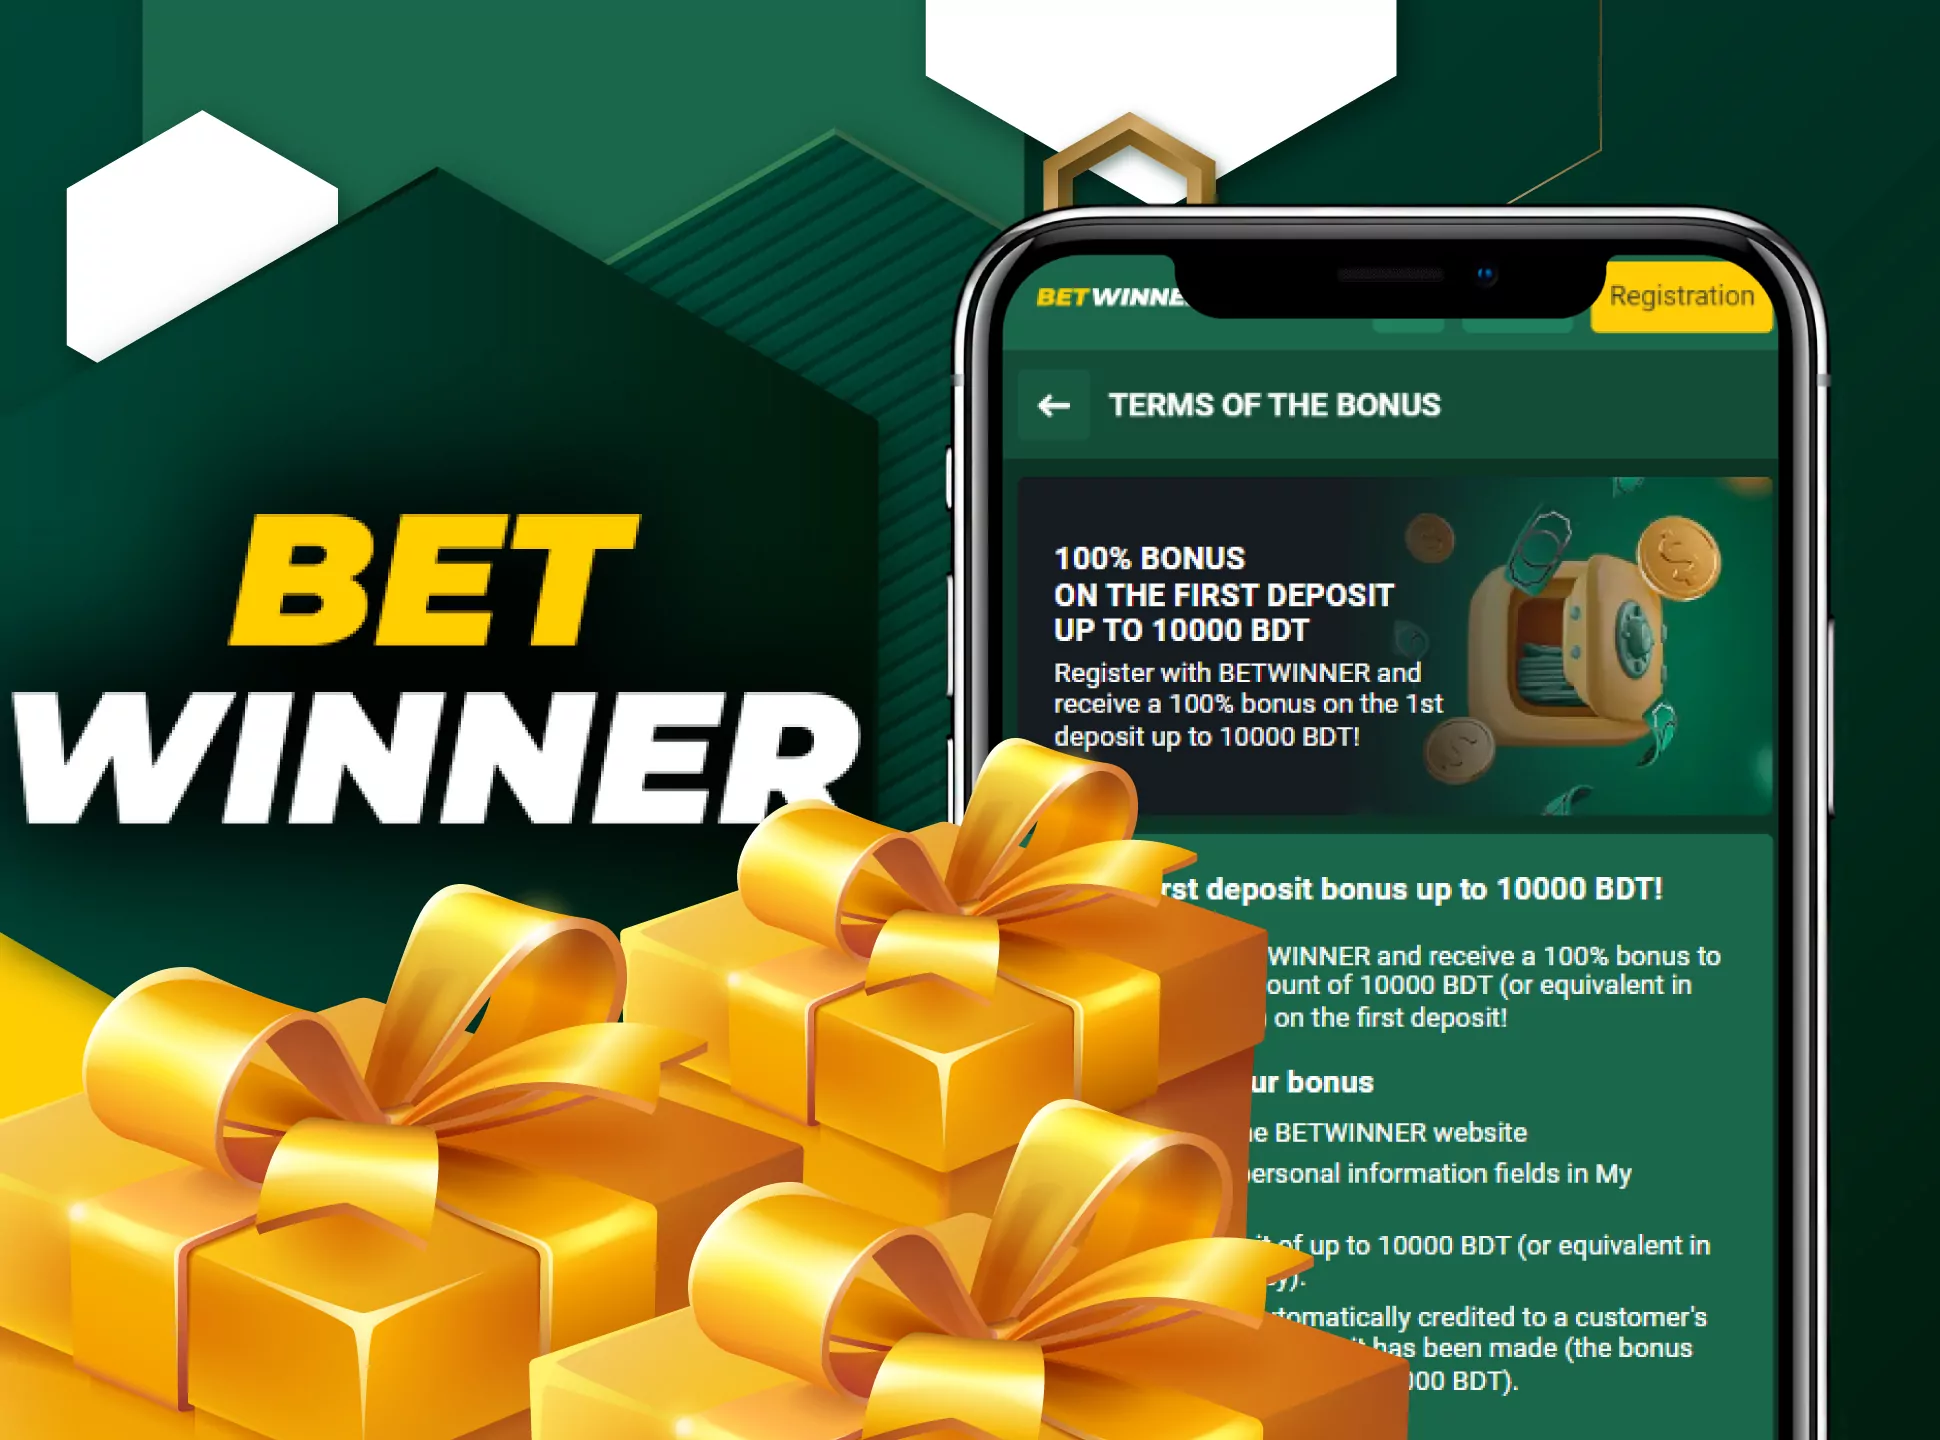 Betwinner offers various bonuses for its players.